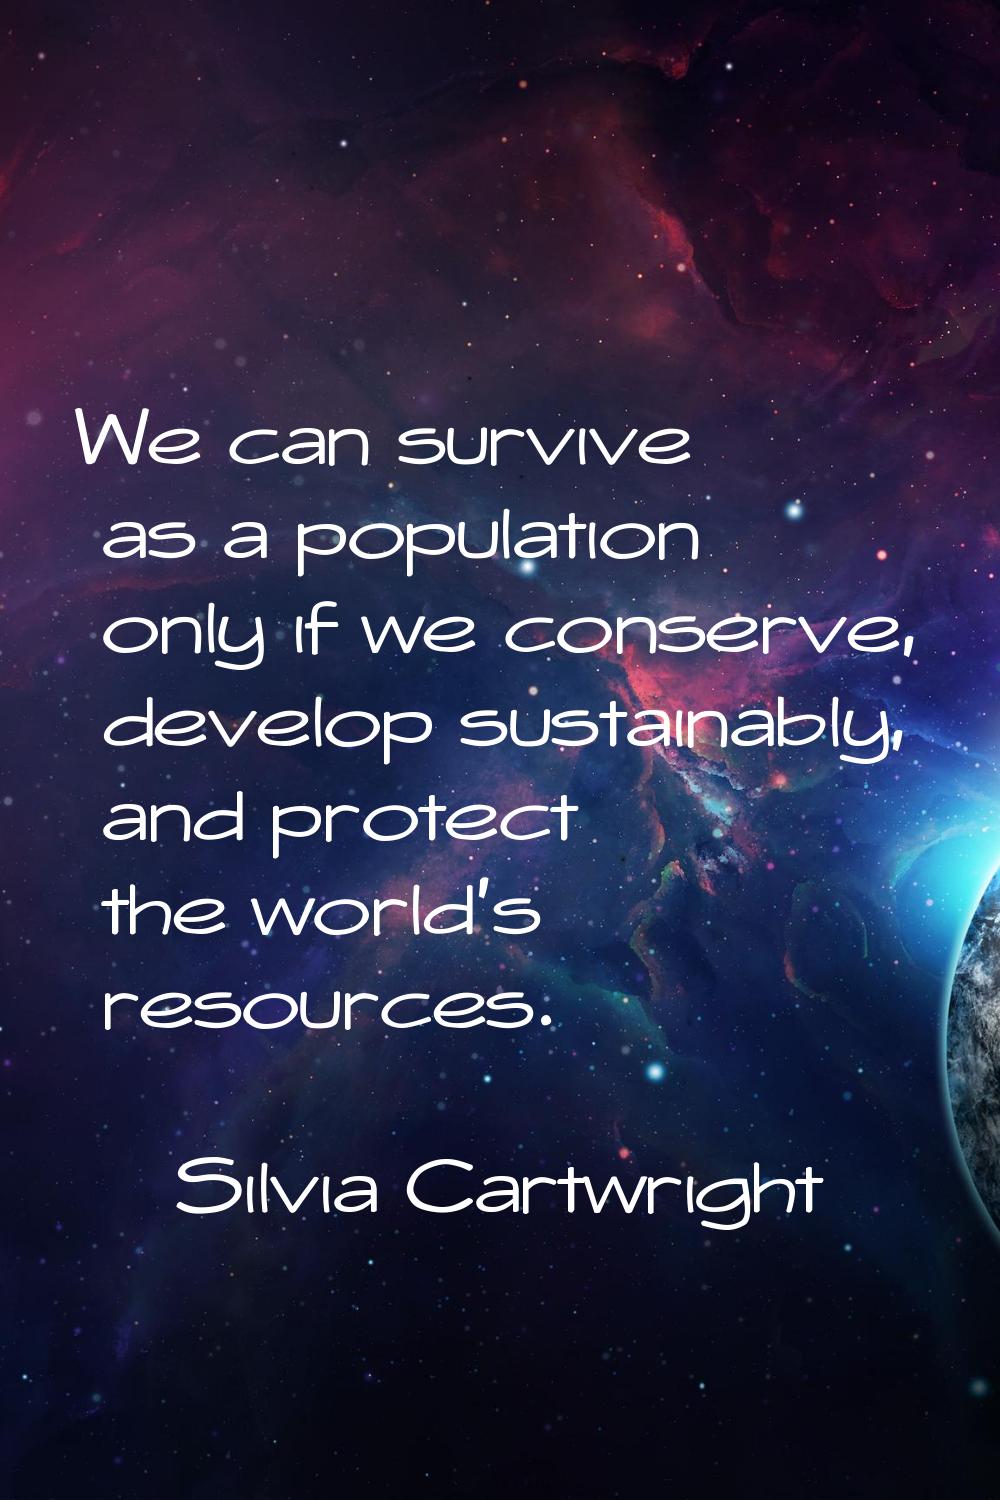 We can survive as a population only if we conserve, develop sustainably, and protect the world's re